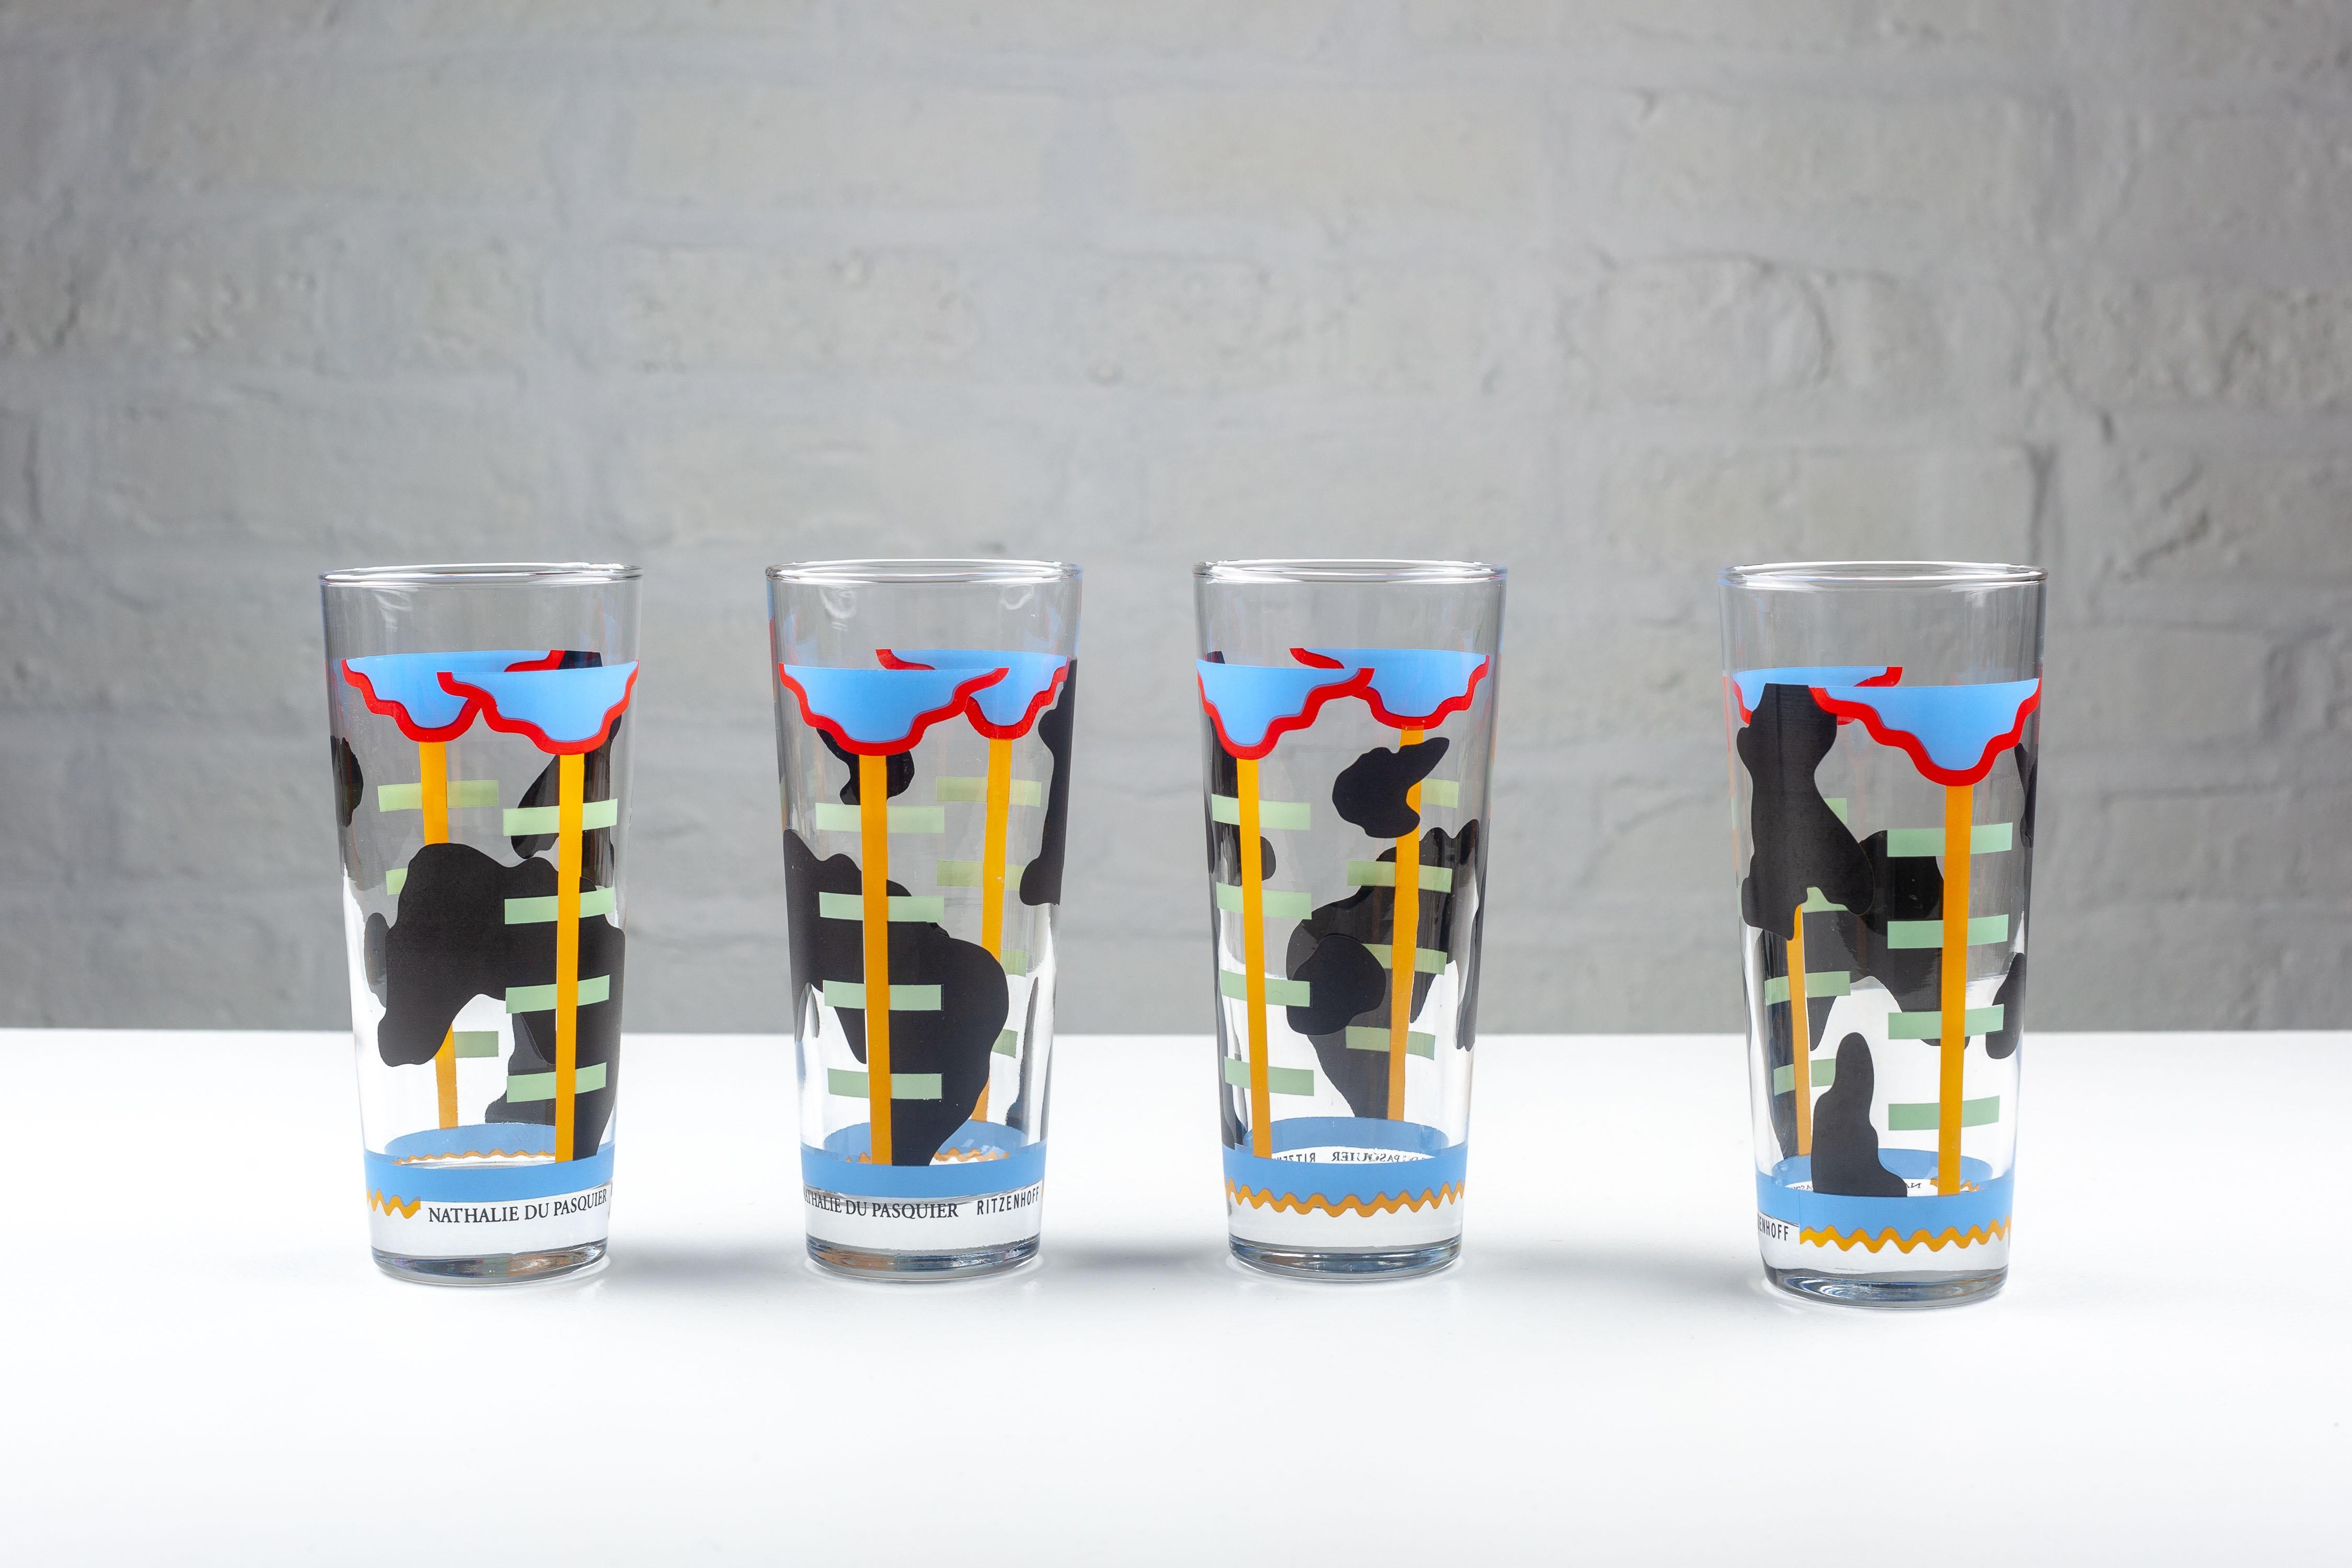 Set of four Memphis glasses, each adorned with a unique, abstract design by Nathalie du Pasquier for Ritzenhoff. They feature a distinctive style characterized by bold colors and geometric patterns. The central theme appears to be a stylized